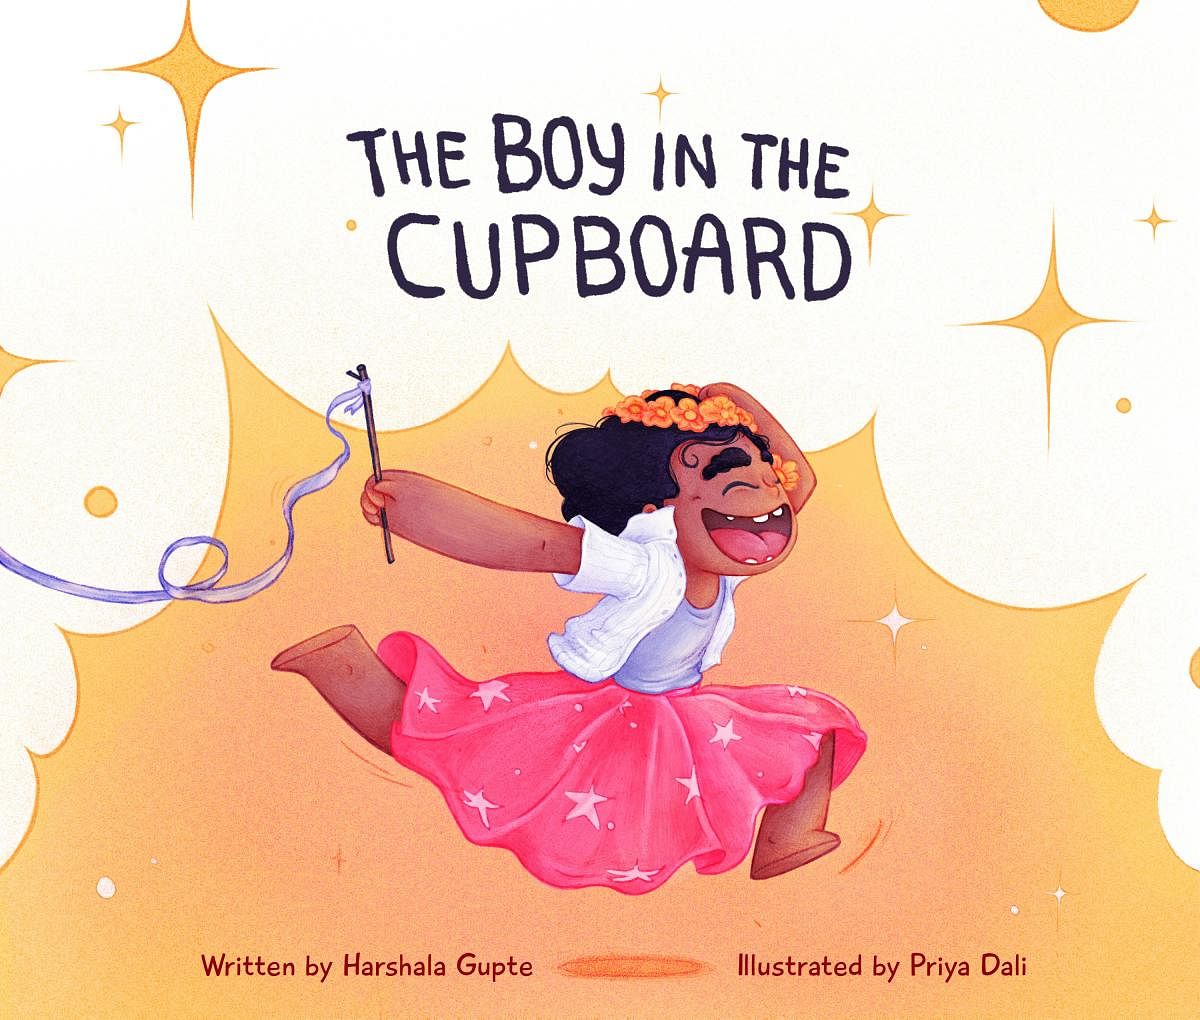 'The Boy In The Cupboard', written by Harshala Gupte and illustrated by Priya Dali, follows Karan, a young boy, who struggles to find his place in world for not fitting into rigid societal expectations.